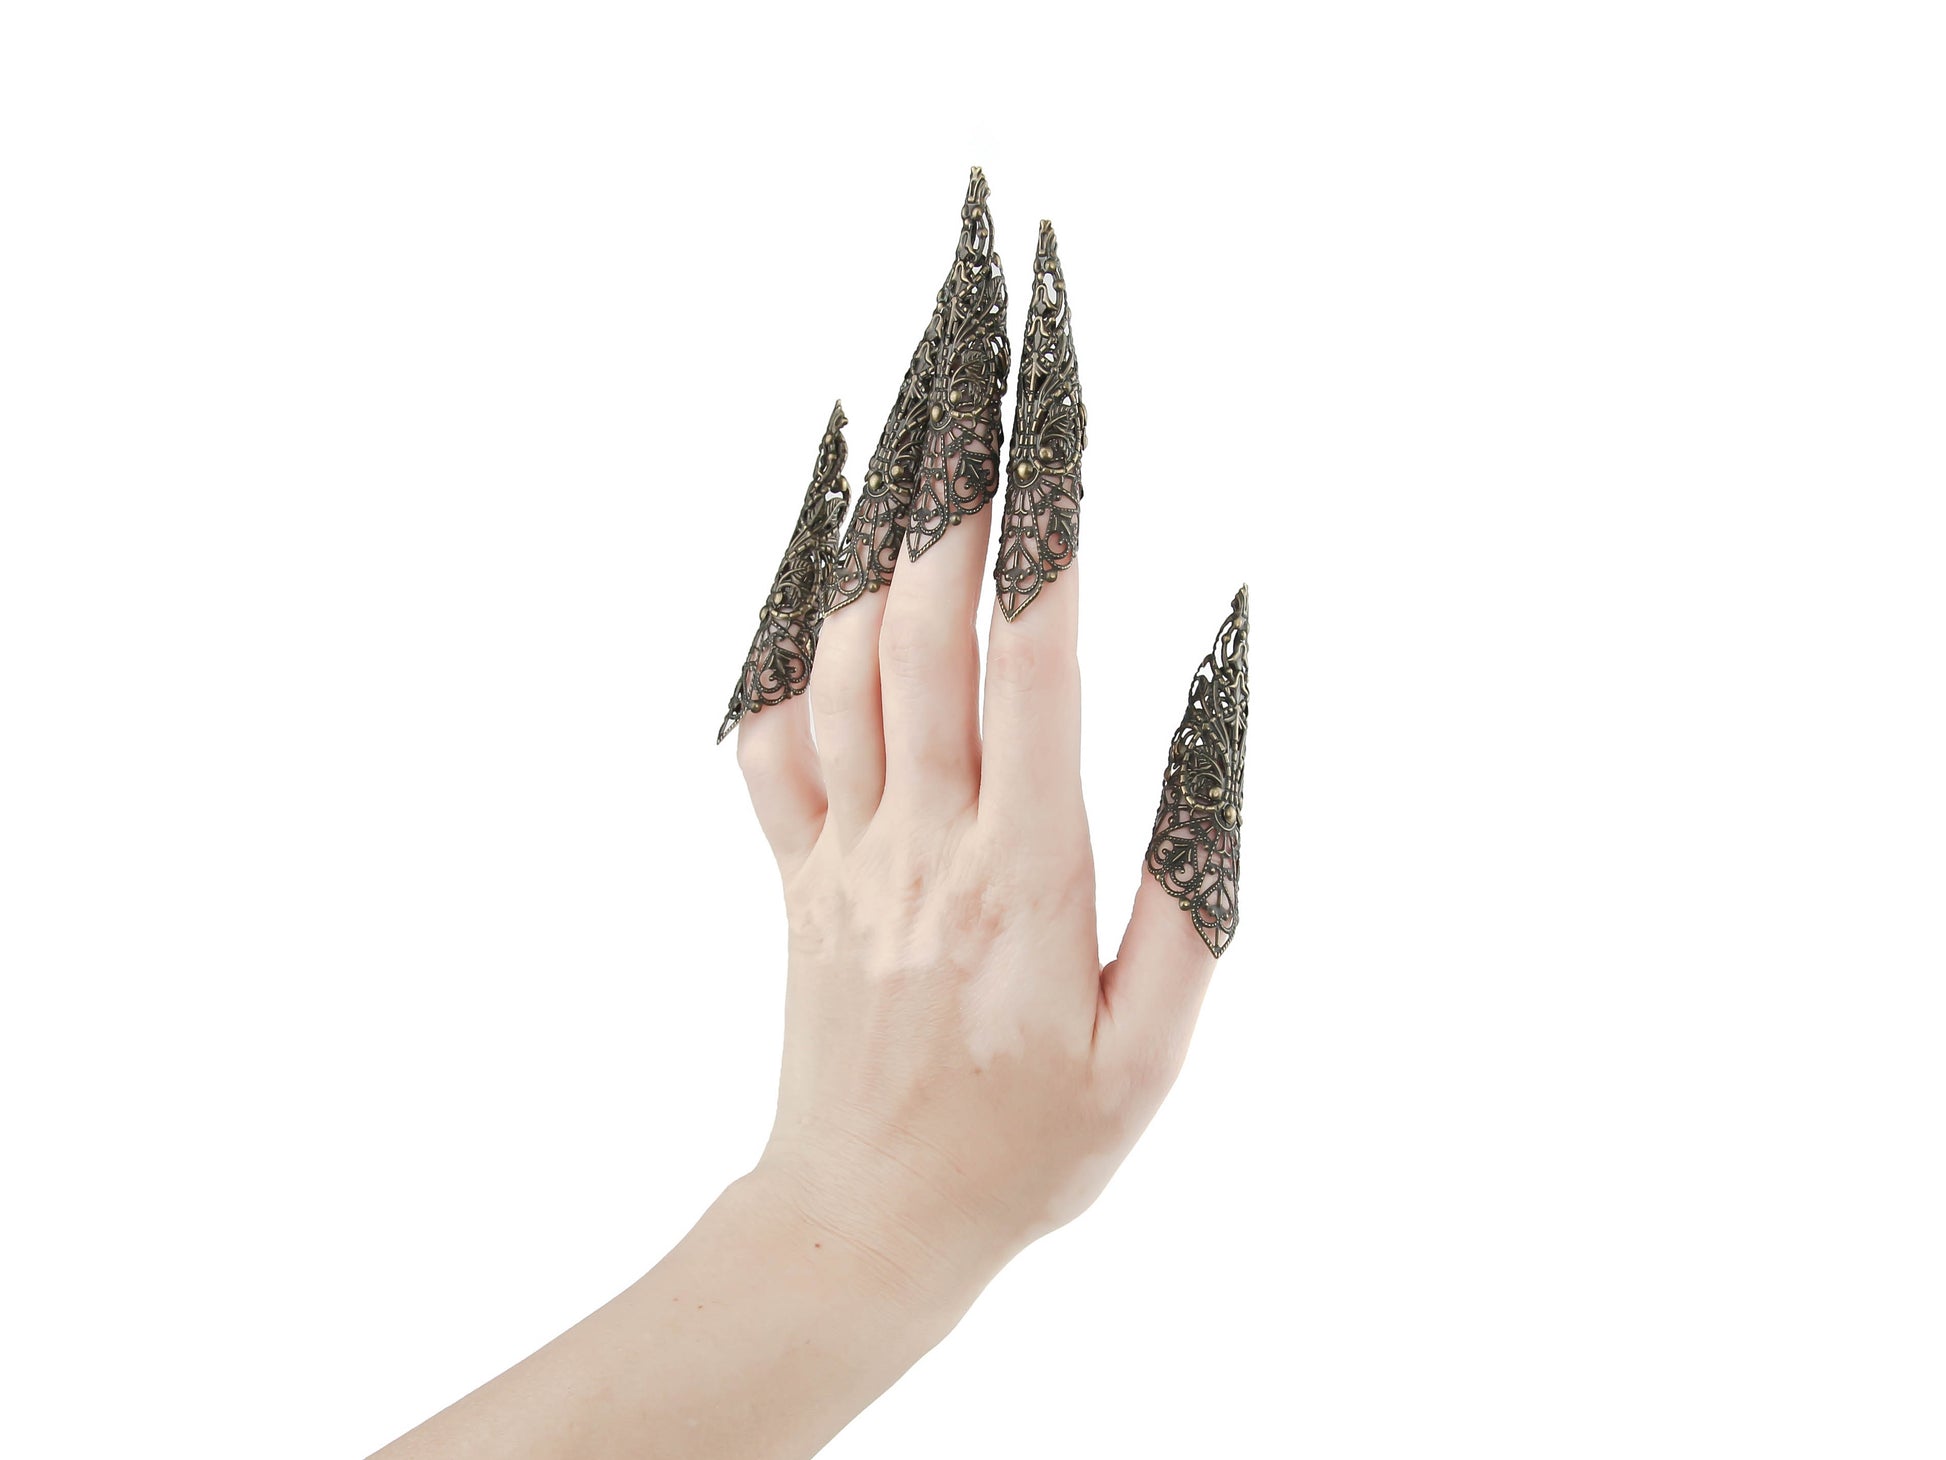 A full hand set of extra-long, intricately designed nail claws from Myril Jewels exudes a dark, neo-goth elegance. Ideal for Halloween, these claws are a bold choice for those who love punk jewelry, whimsigoth style, or witchcore. They're perfect for adding an avant-garde touch to everyday wear or as a statement at rave parties and festivals. These claws are also a unique gift idea for a goth girlfriend.